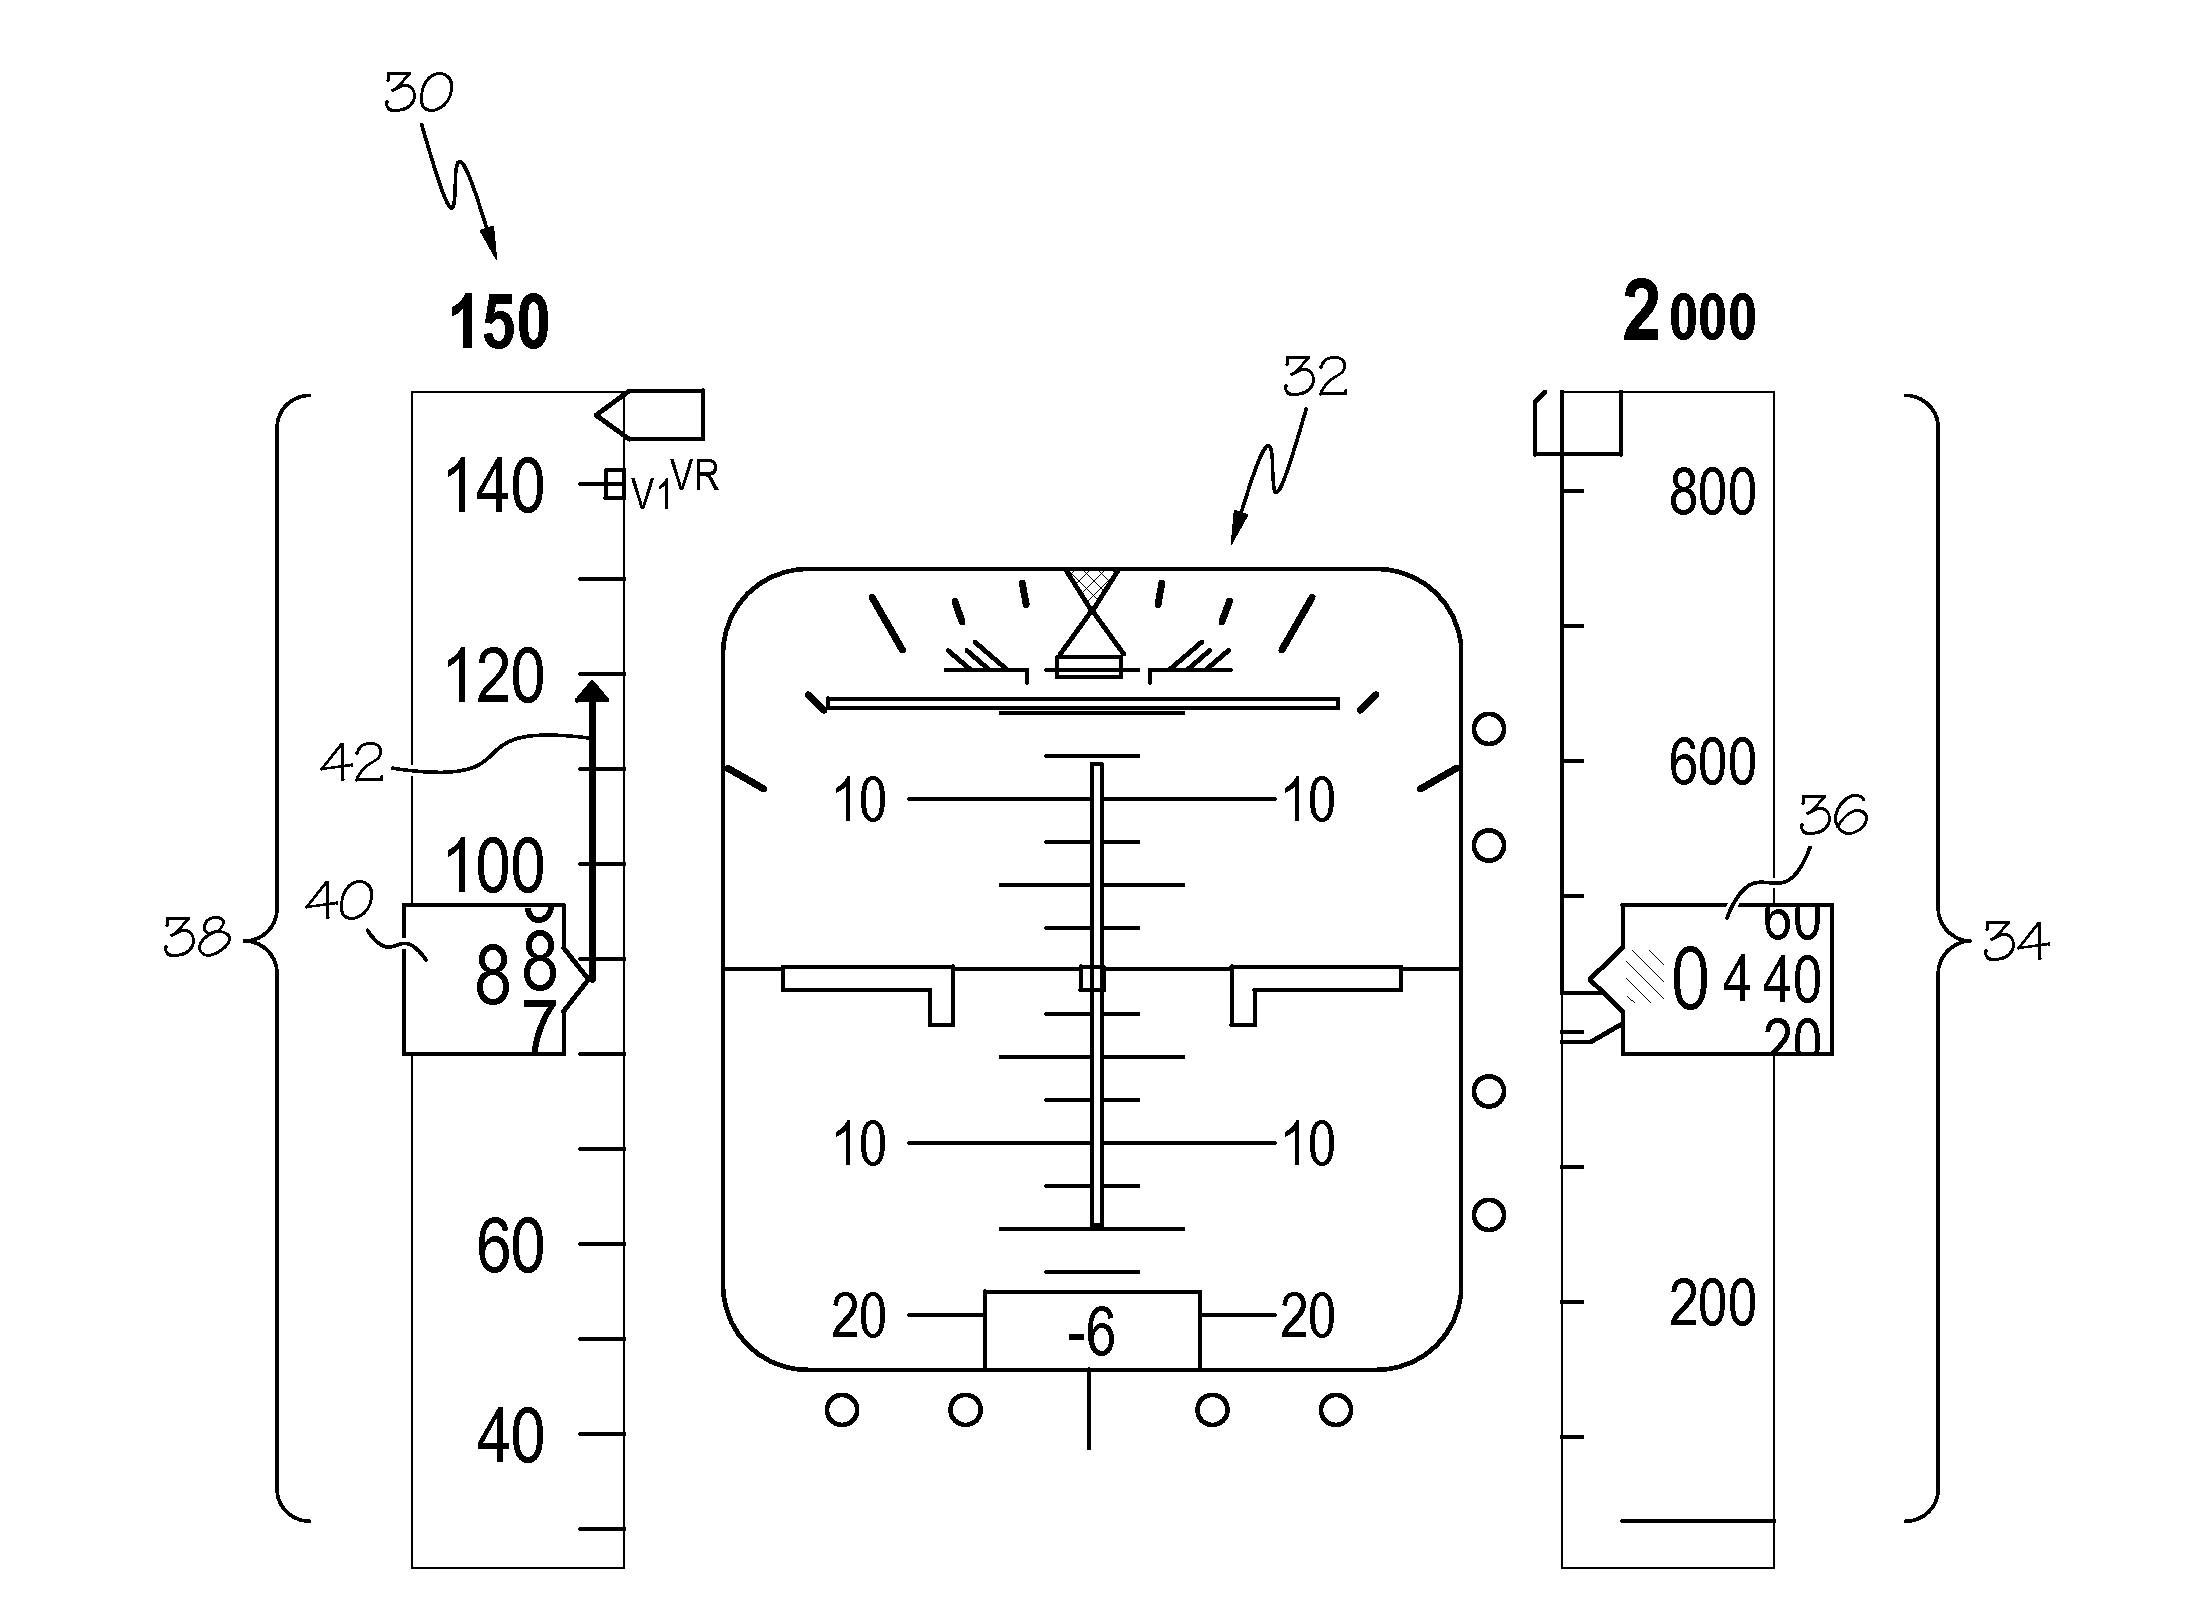 Flight deck display systems and methods for visually indicating low speed change conditions during takeoff and landing